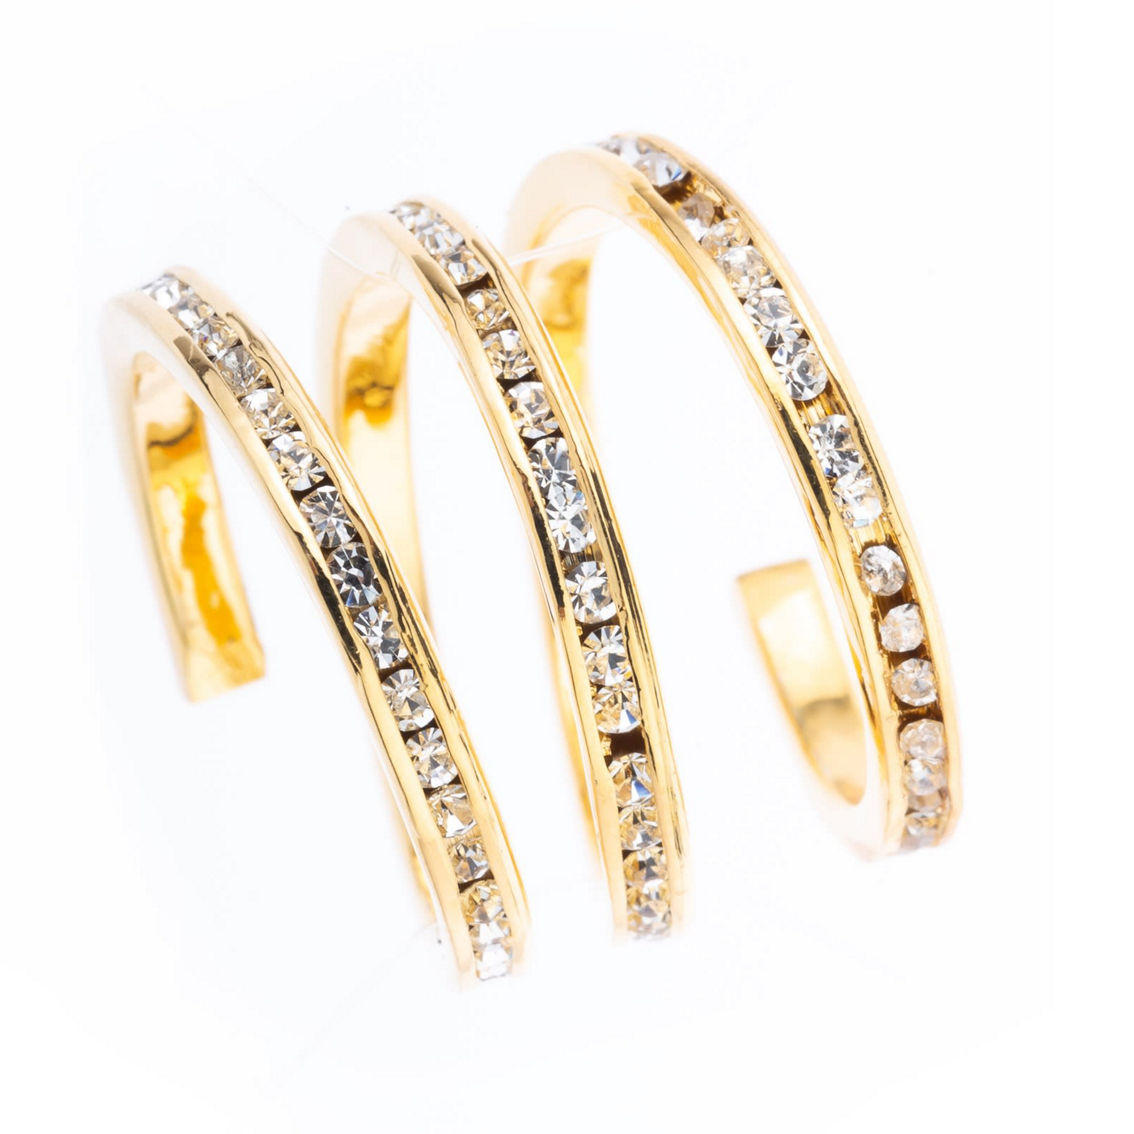 Gold Plated Clear Crystal Spiral Ring - Image 2 of 2